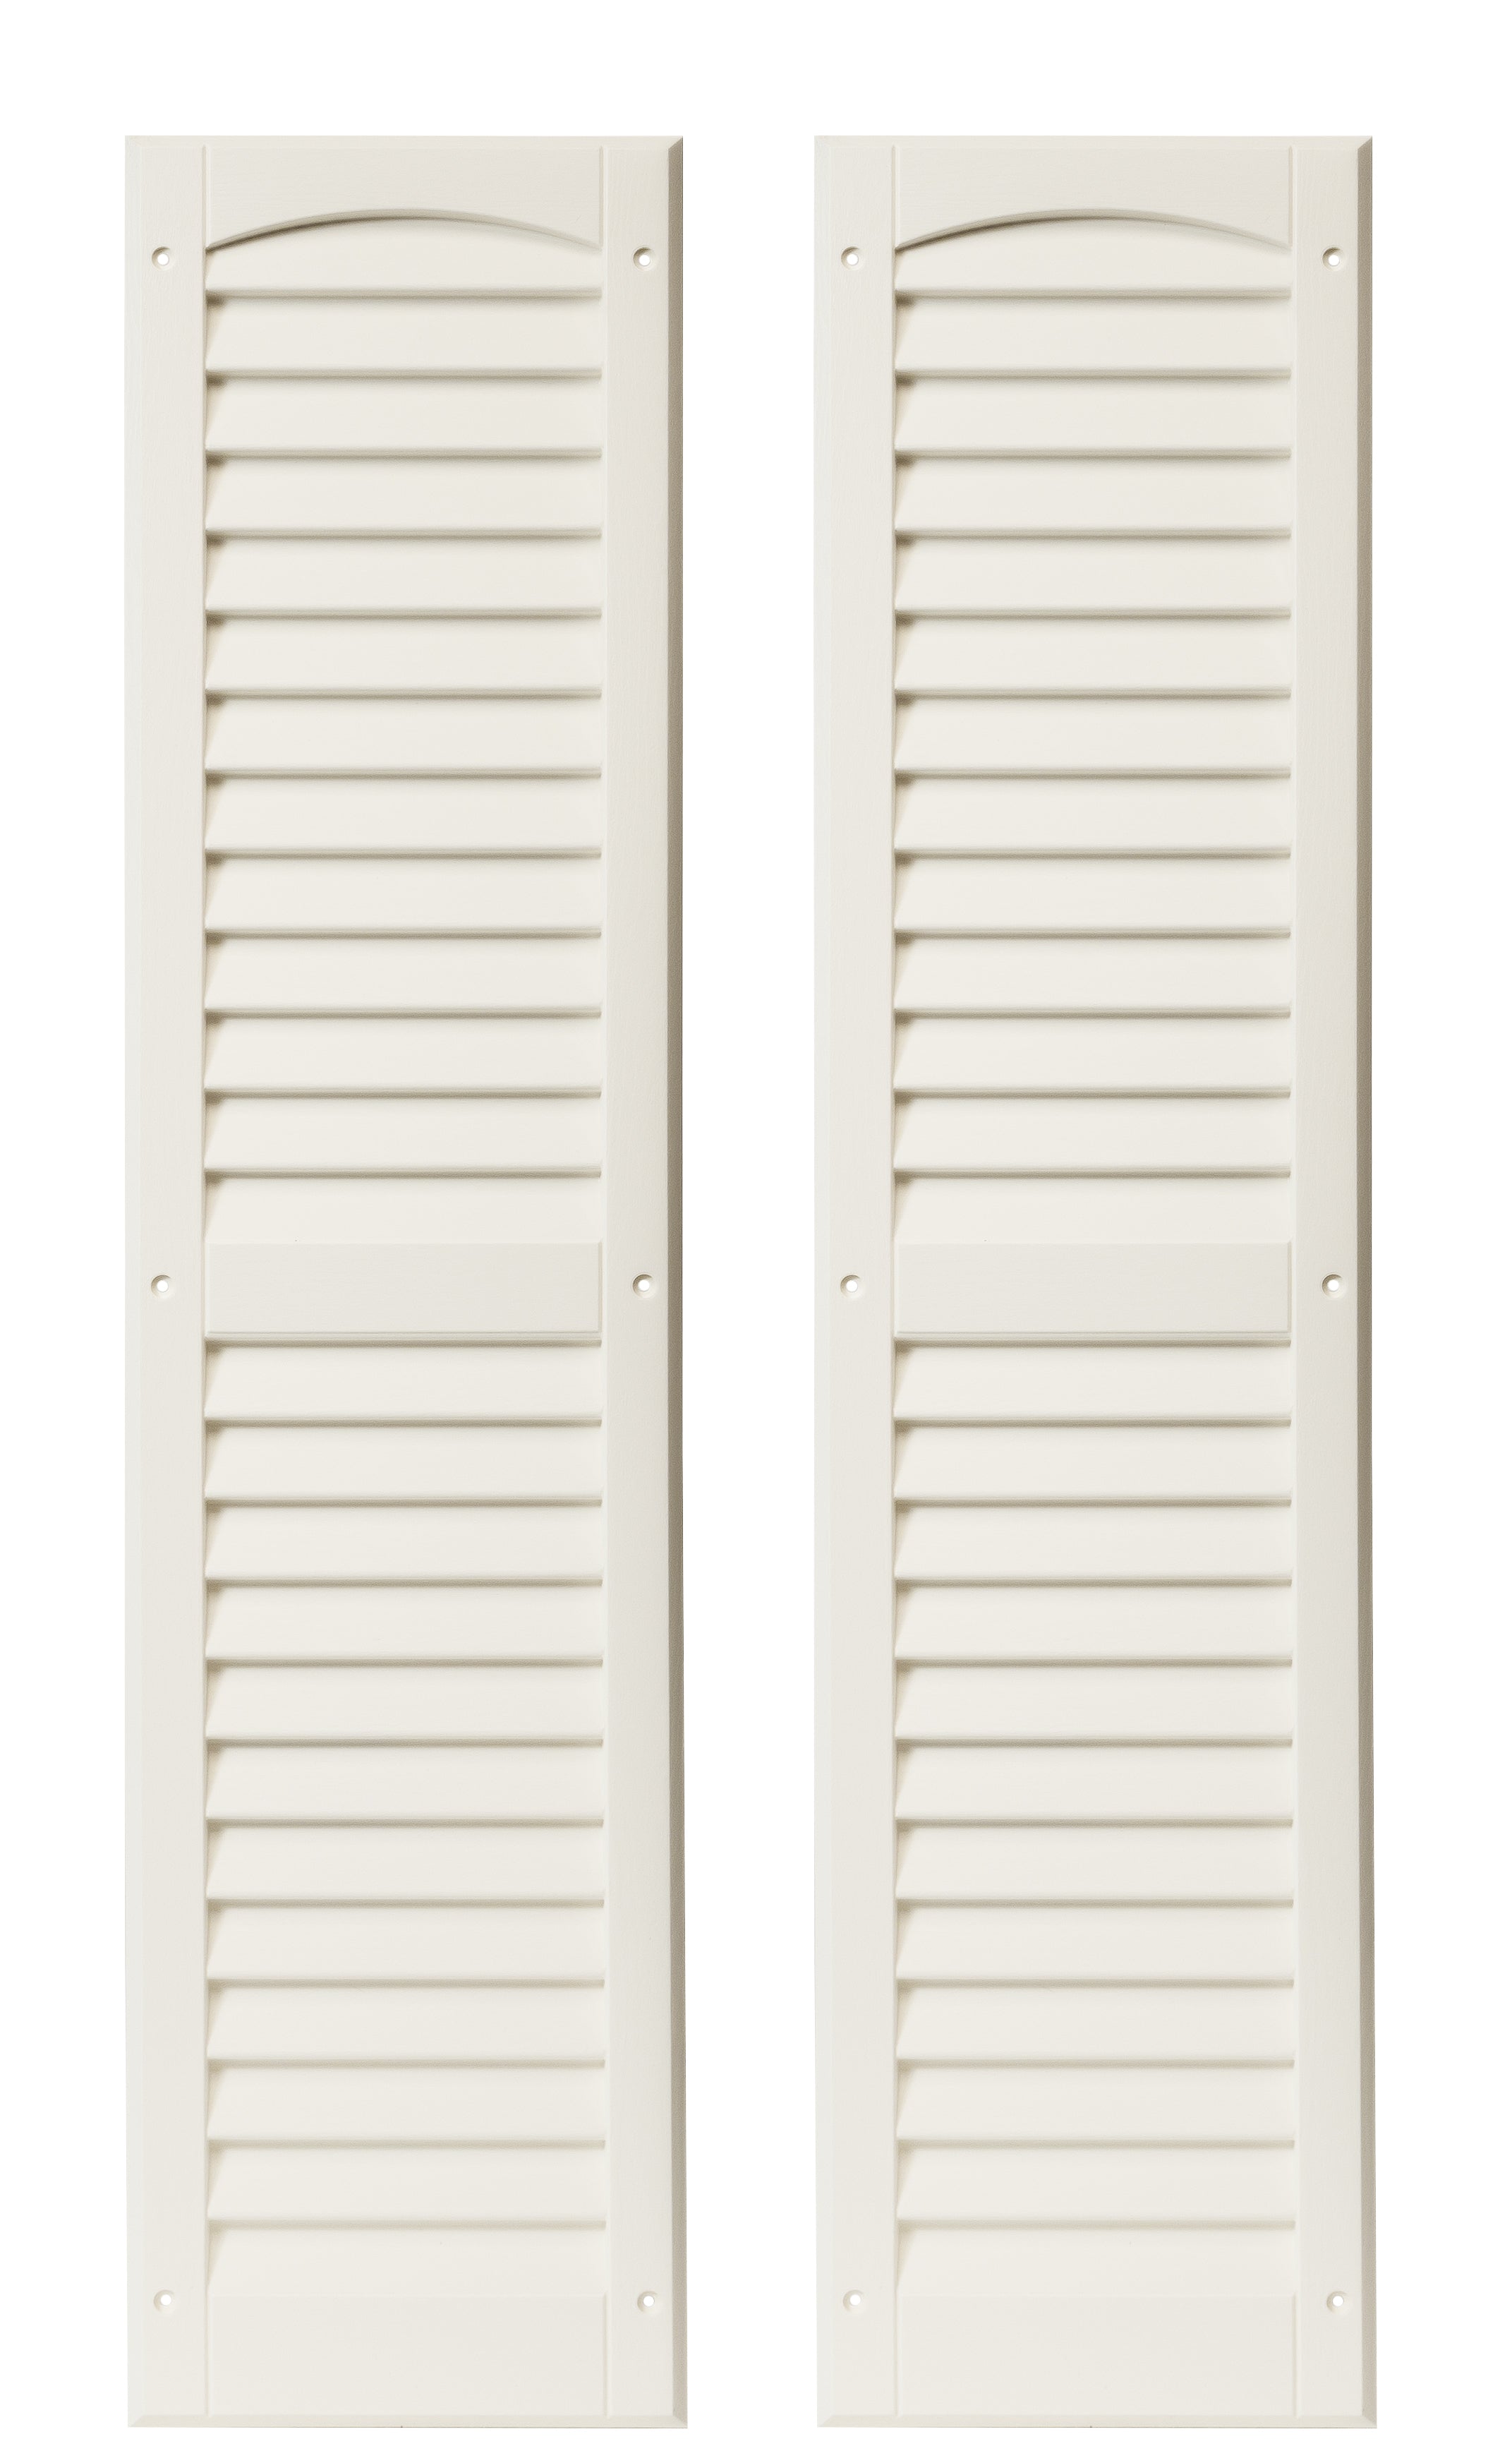 Pair of 9" W x 36" H Louvered White Shutters for Sheds, Playhouses, and MORE 